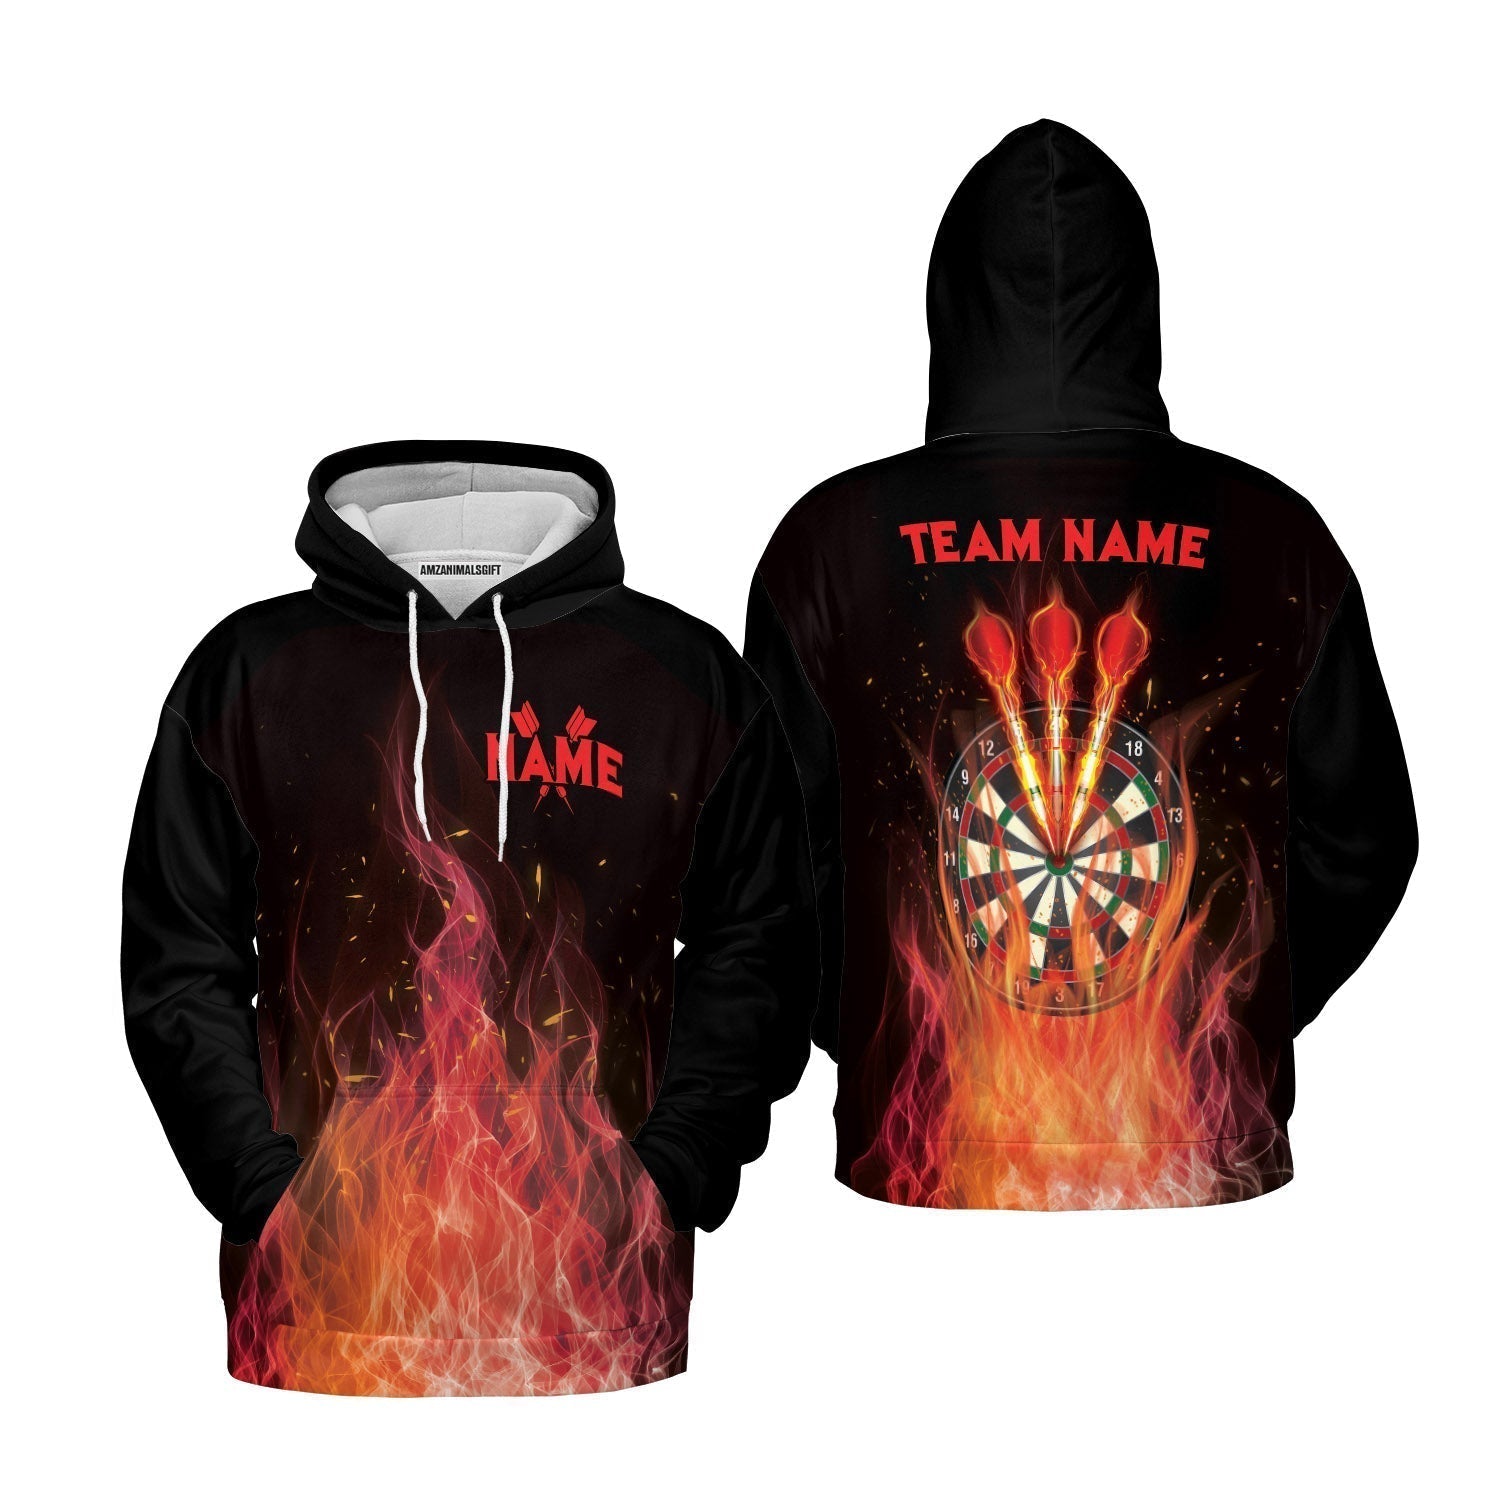 Darts Hoodie Custom Name And Team Name, Darts Flame Player Uniform, Personalized Shirt For Darts Lovers, Darts Players